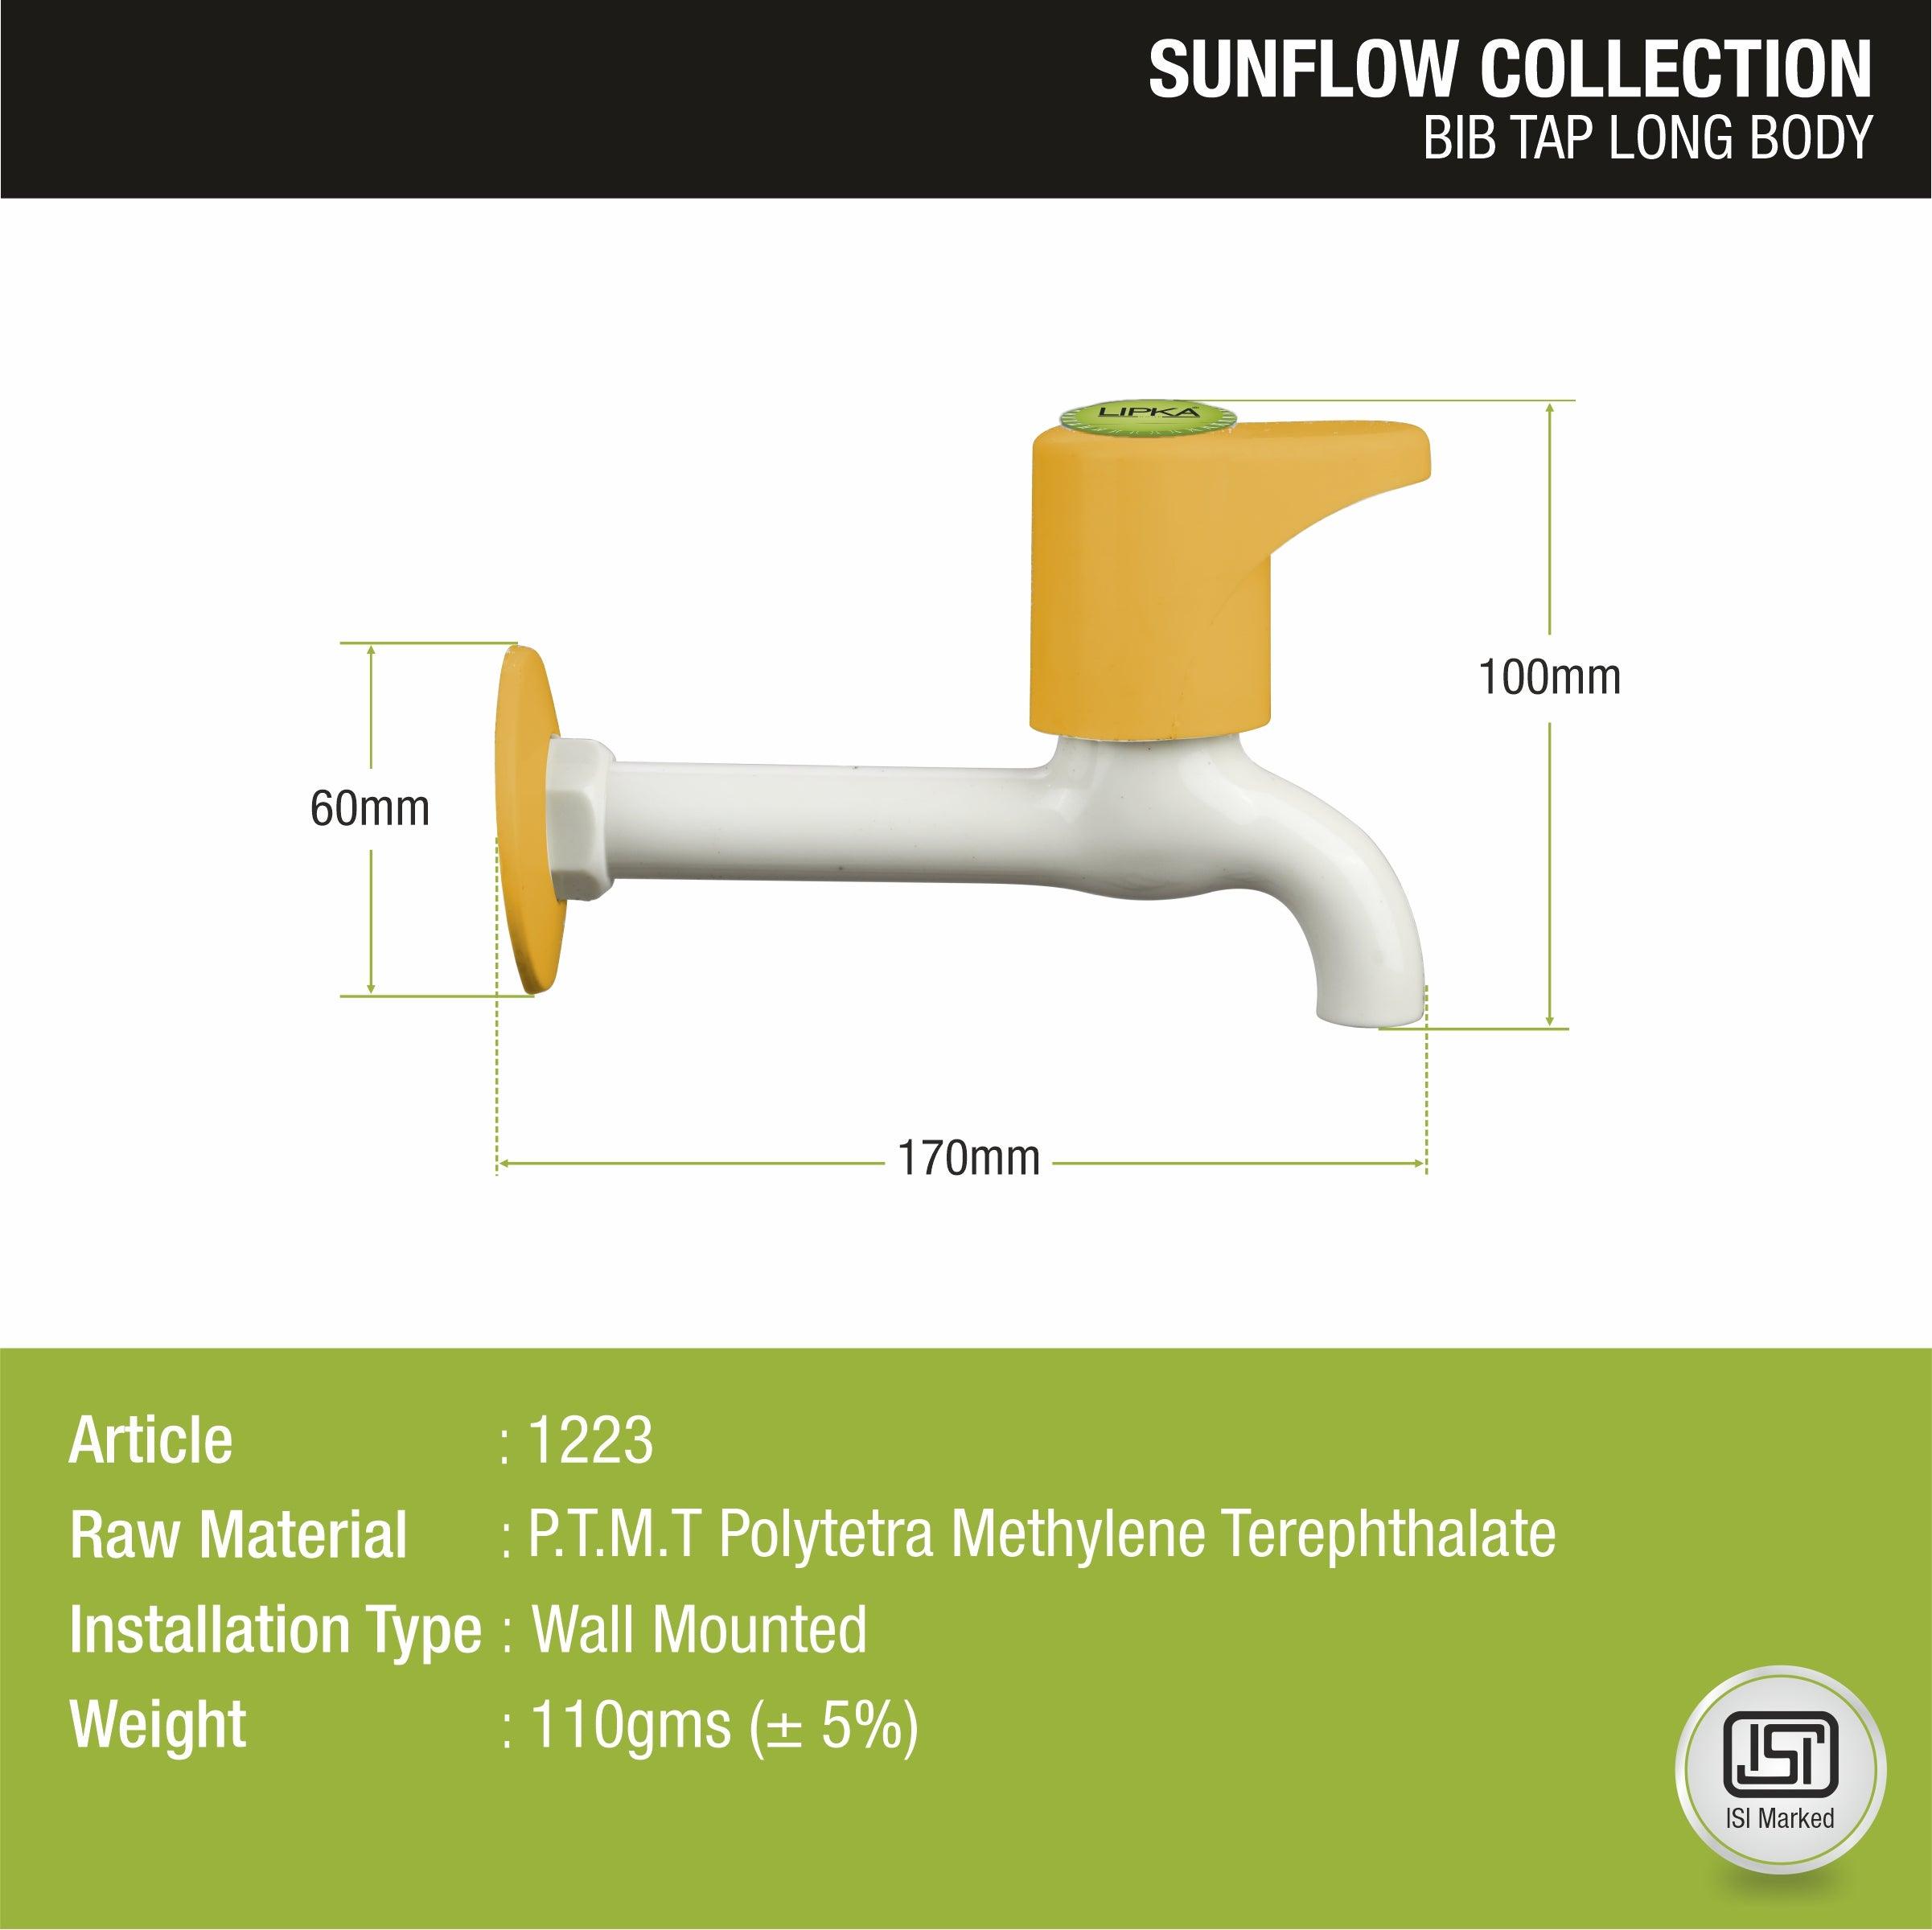 Sunflow Bib Tap Long Body PTMT Faucet sizes and dimensions